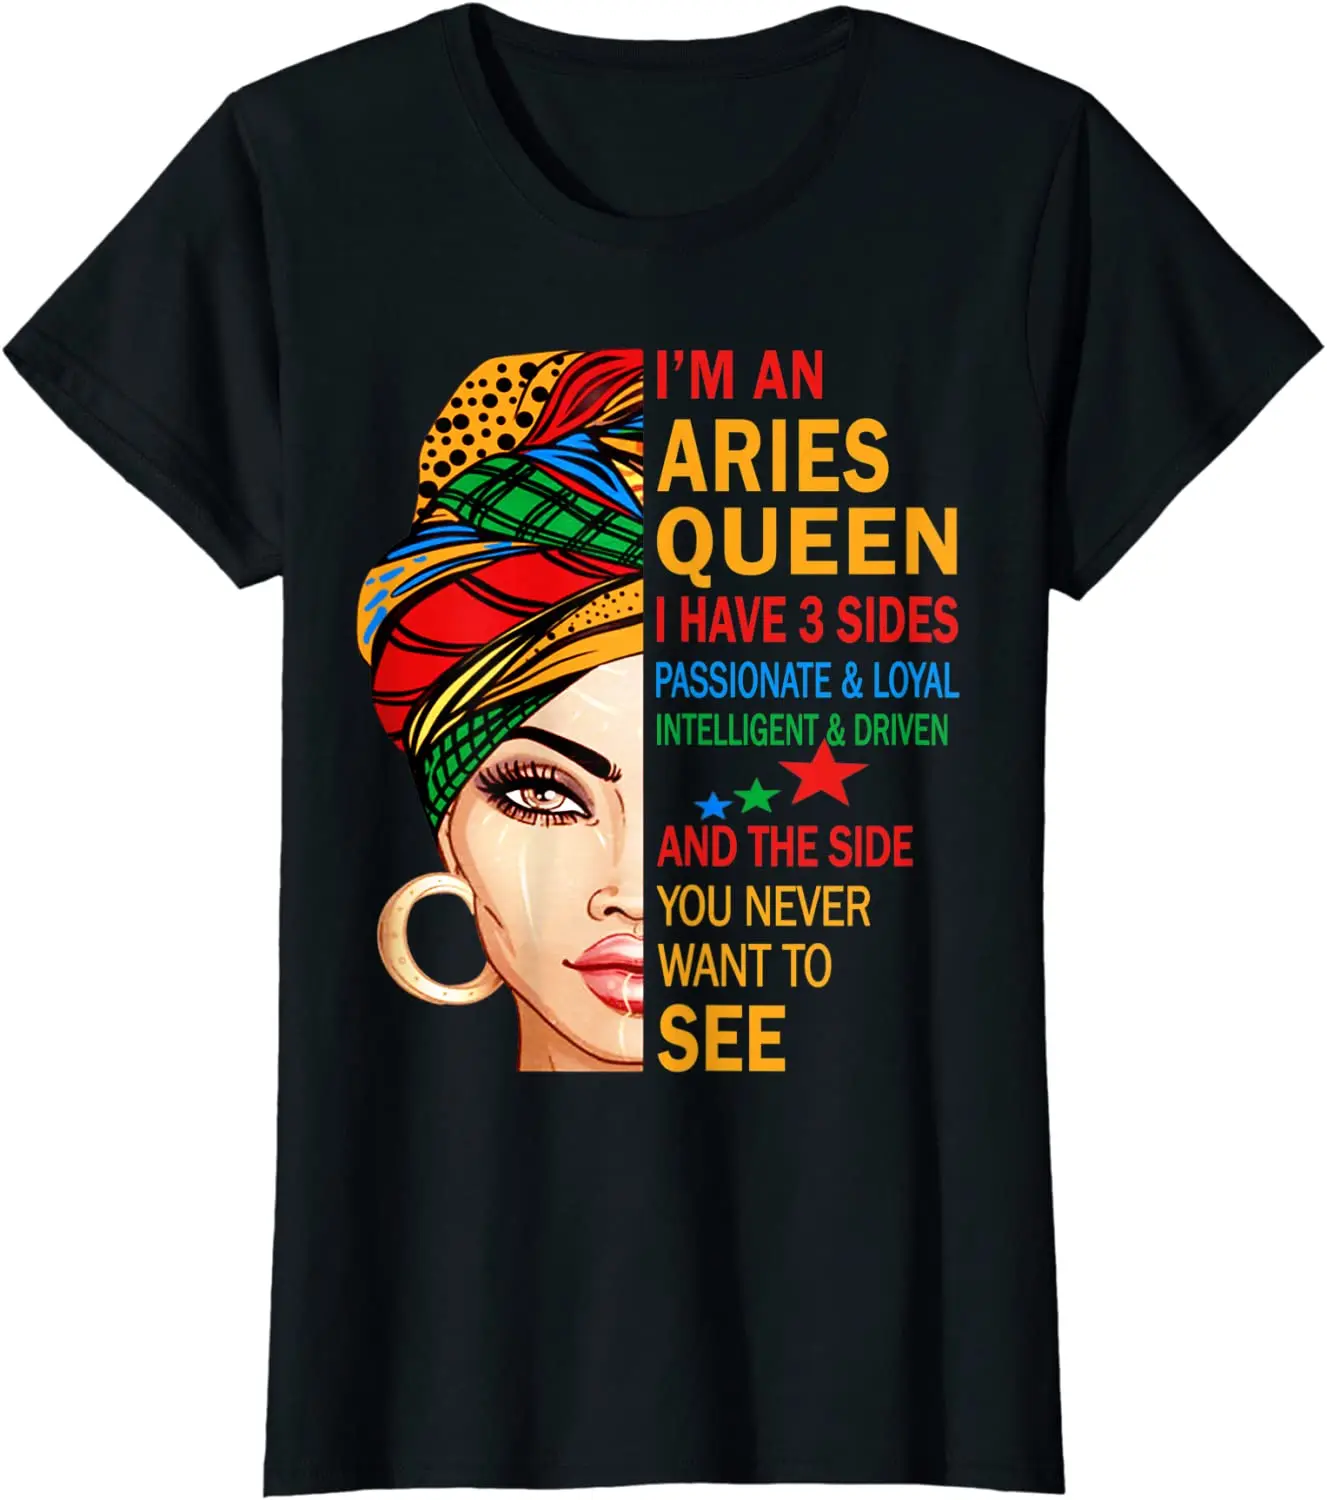 Womens Aries queen I have 3 sides shirt birthday gift zodiac Aries T-Shirt Cotton Men Tees Casual T Shirts Europe Newest